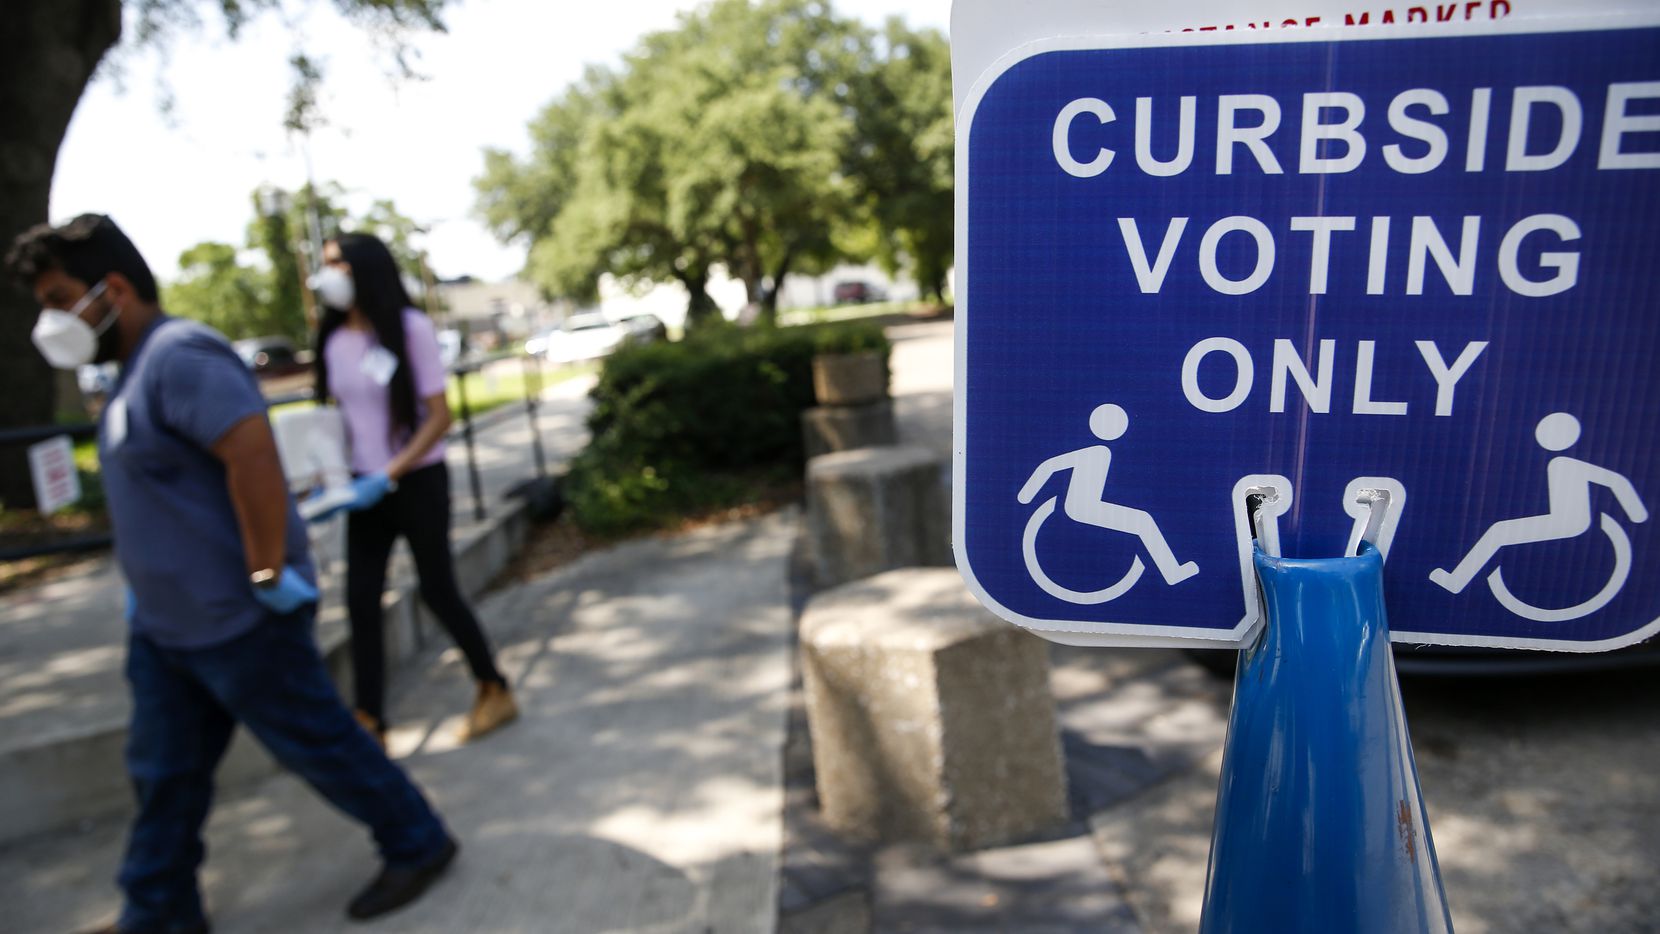 5 Things to Know About Voting in Texas from the “Know About It, Vote About It” Town Hall